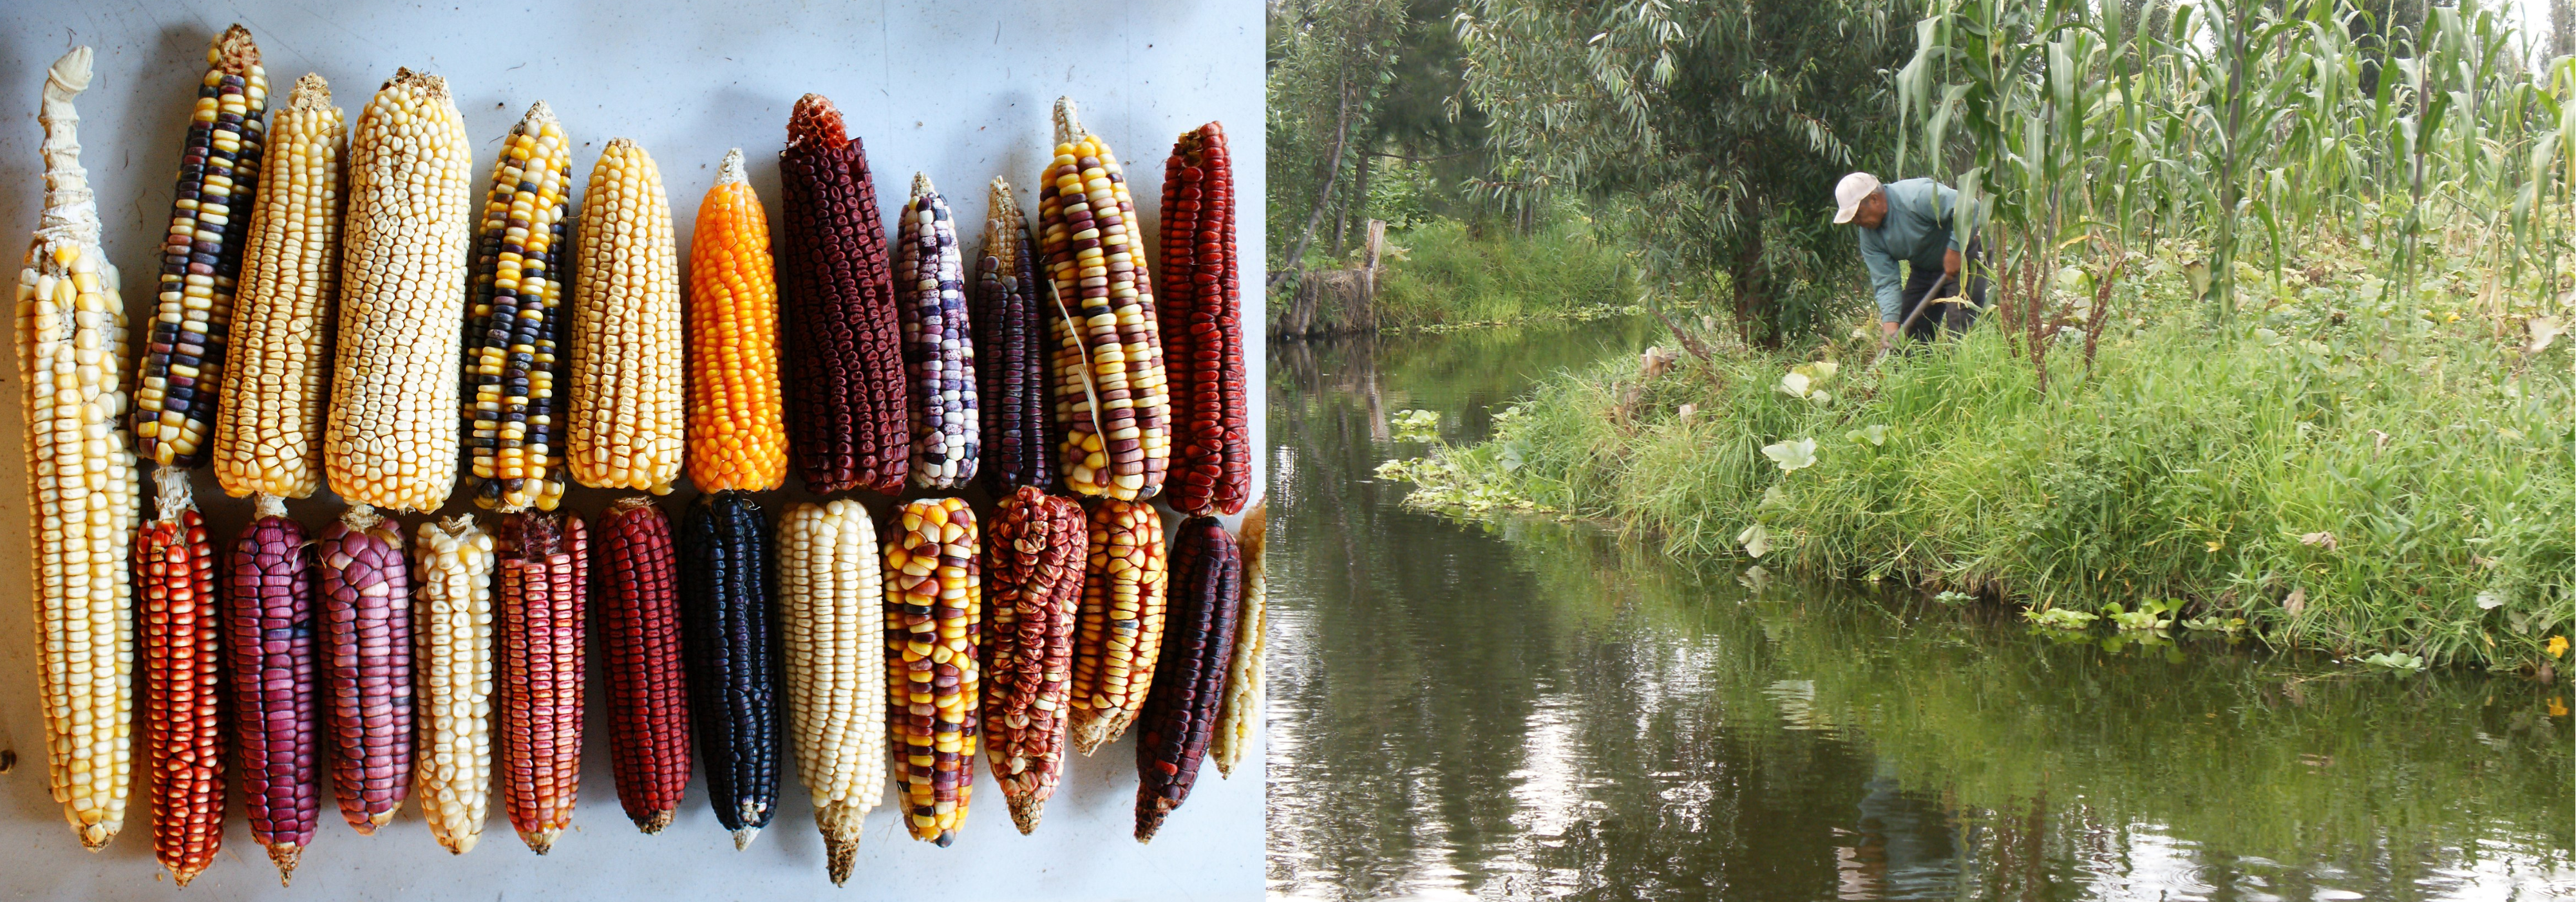 More than two dozen varieties of Mesoamerican maize and a man along a riverbank illustrating chinampa agriculture